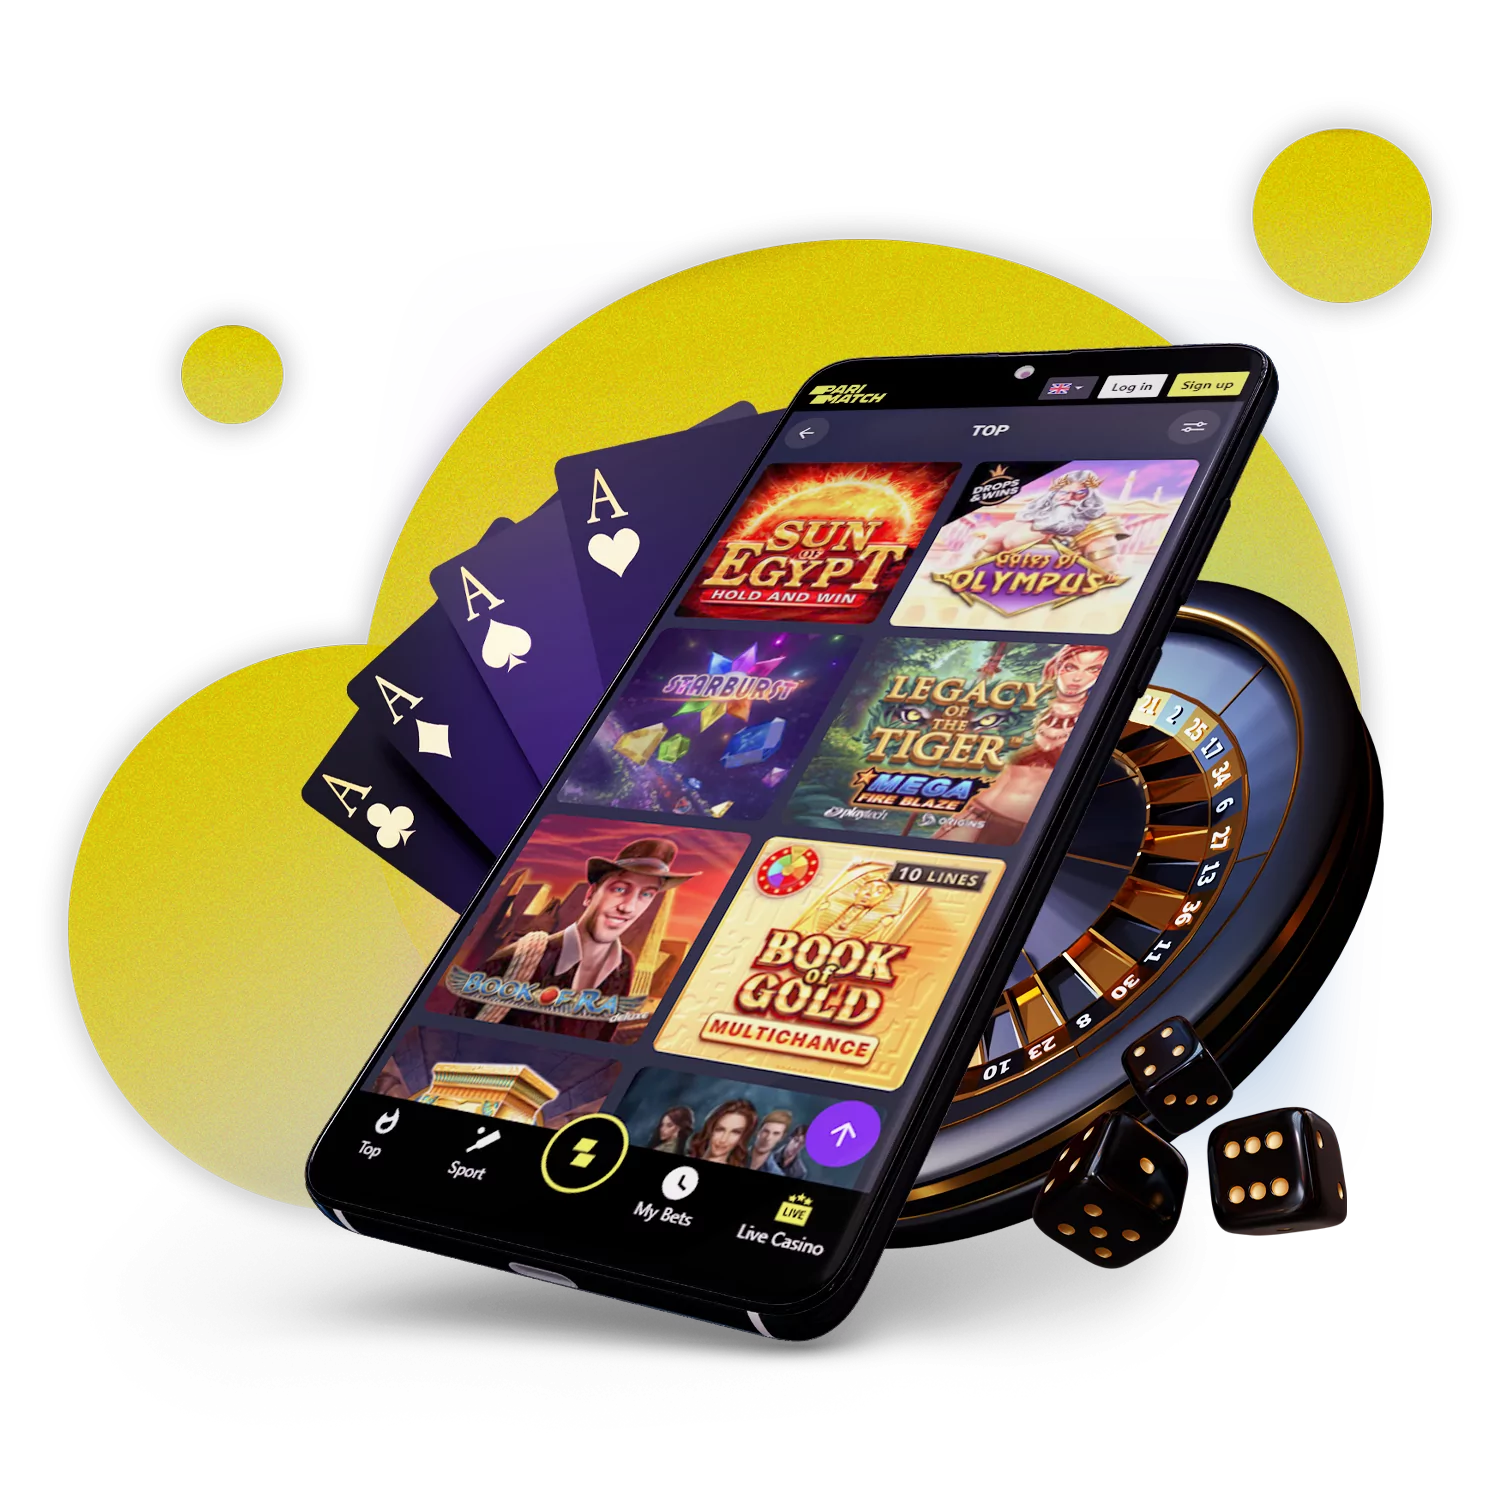 Learn how to install the Parimatch app and use it for playing casino games.